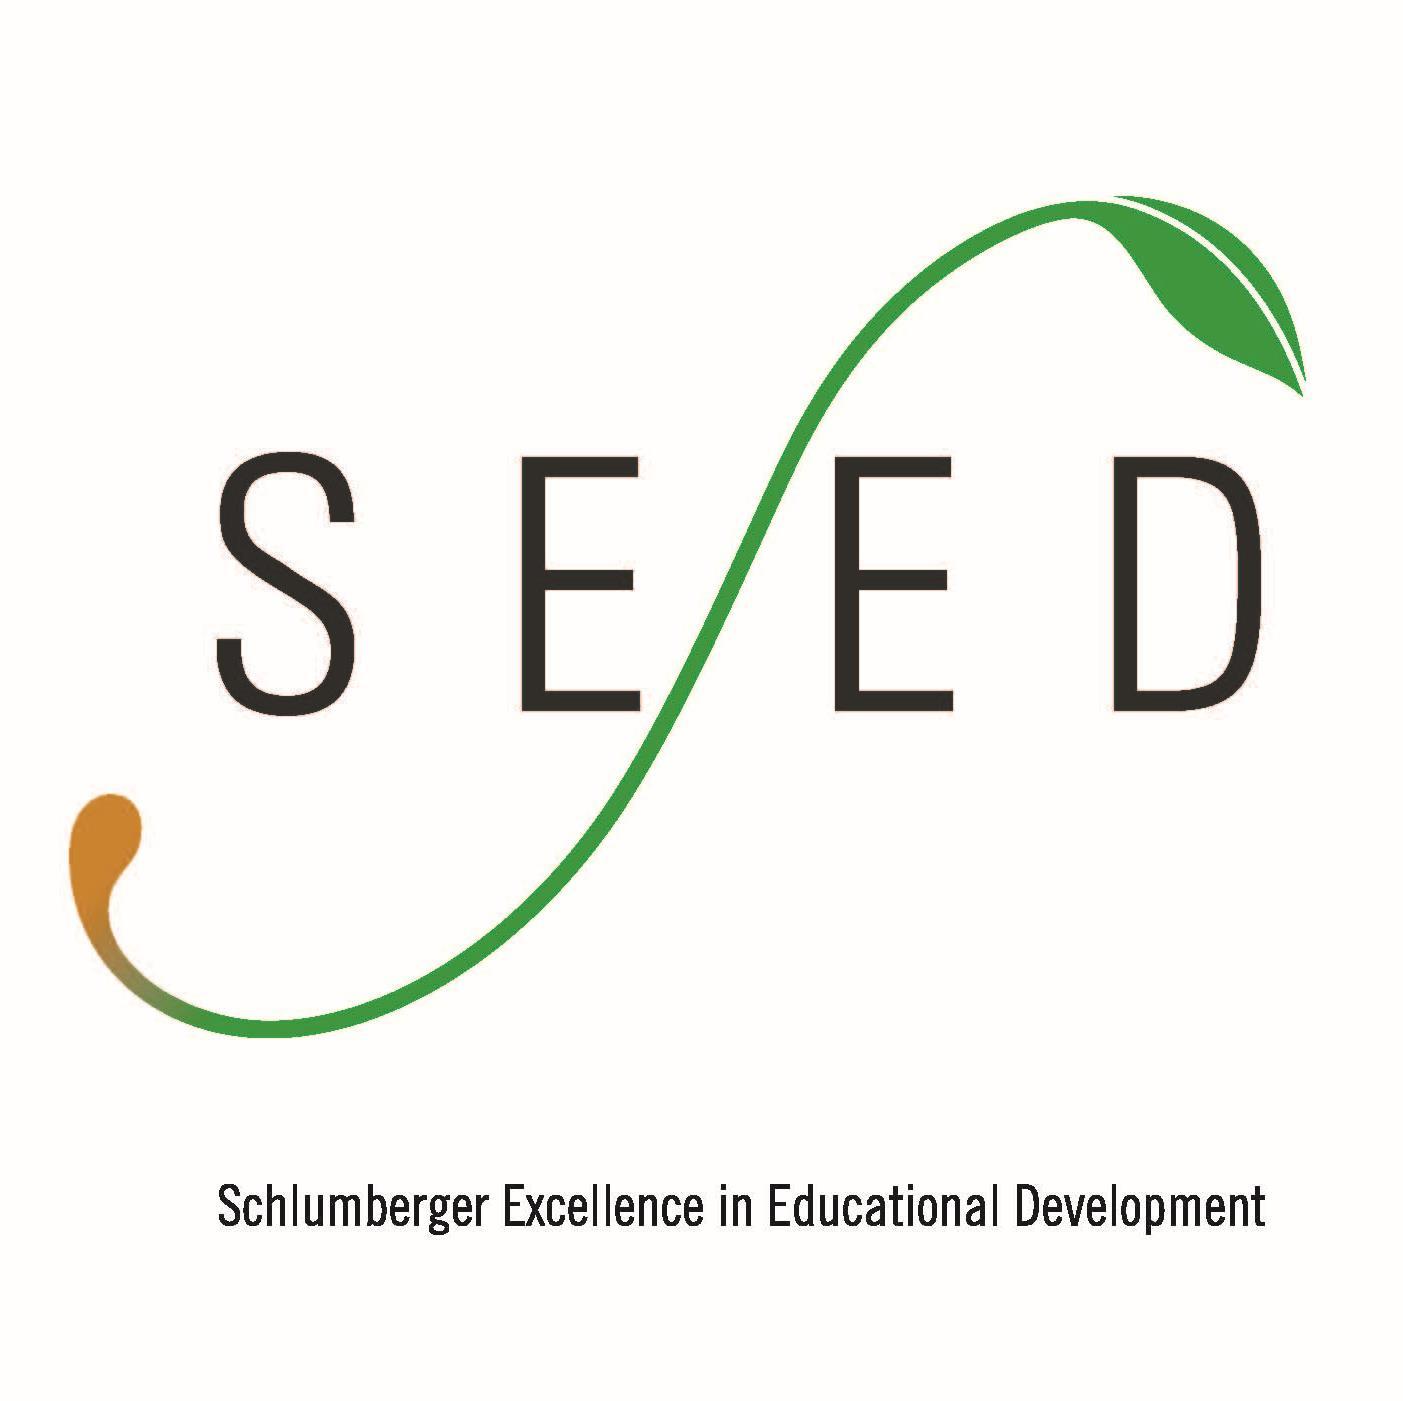 SEED - Volunteer corps that makes science fun and engaging in classrooms everywhere. #STEM #science #scienceed